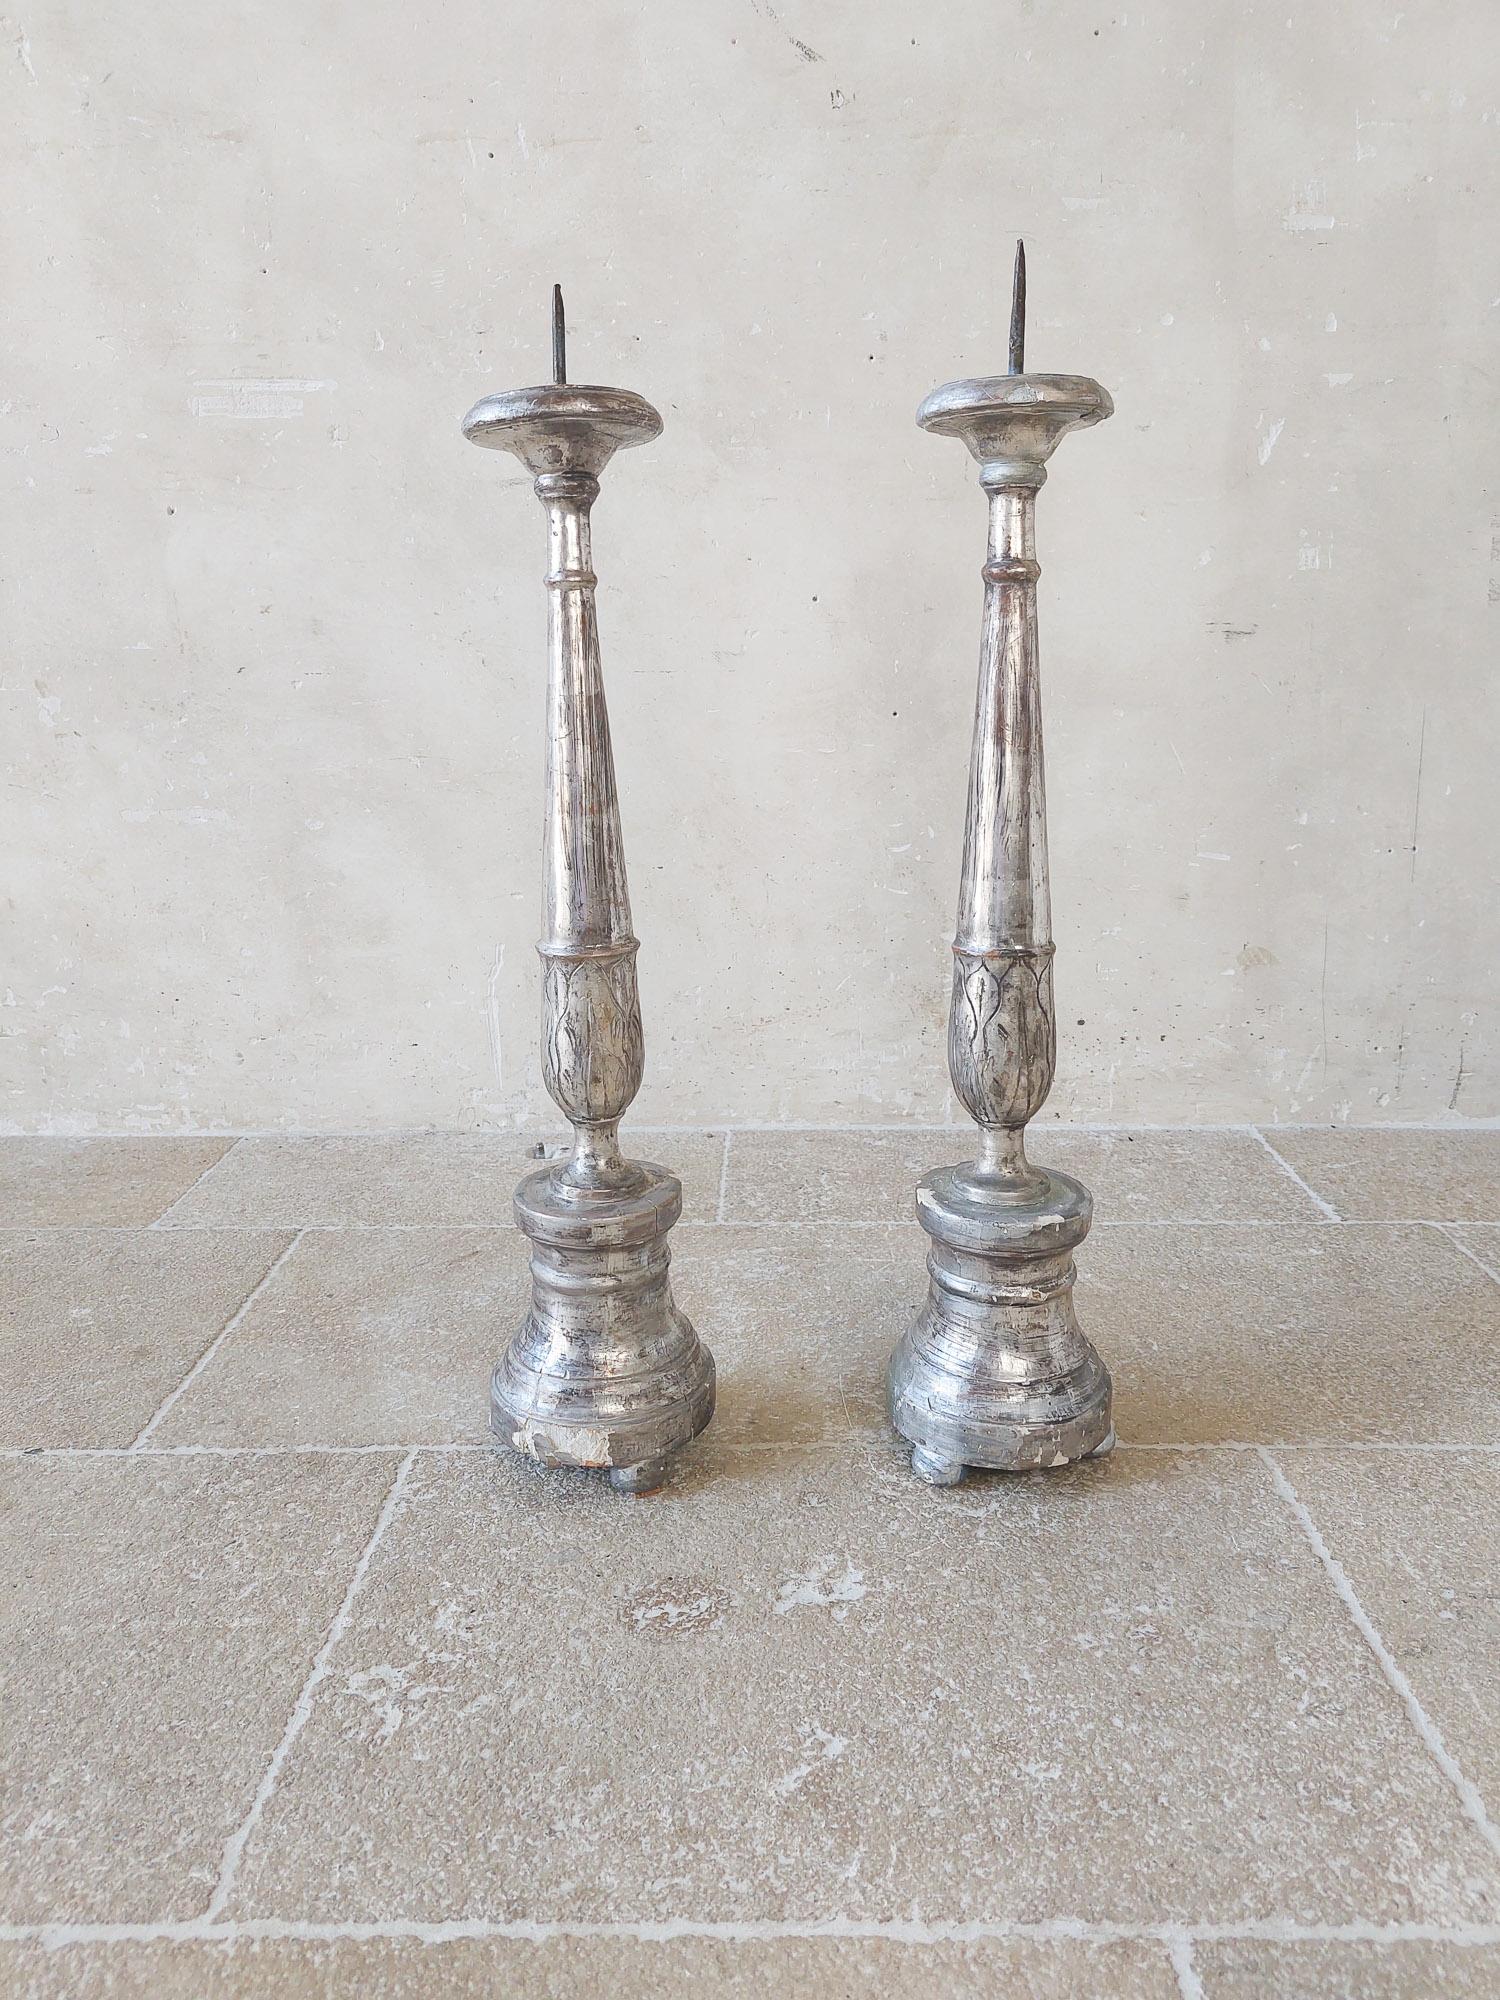 Antique wood carved and silver plated church candlesticks from the 18th century.

Beautiful old french candle holders with clear signs of age, see photos. Structurally intact.

Height 72, diameter 15 cm.